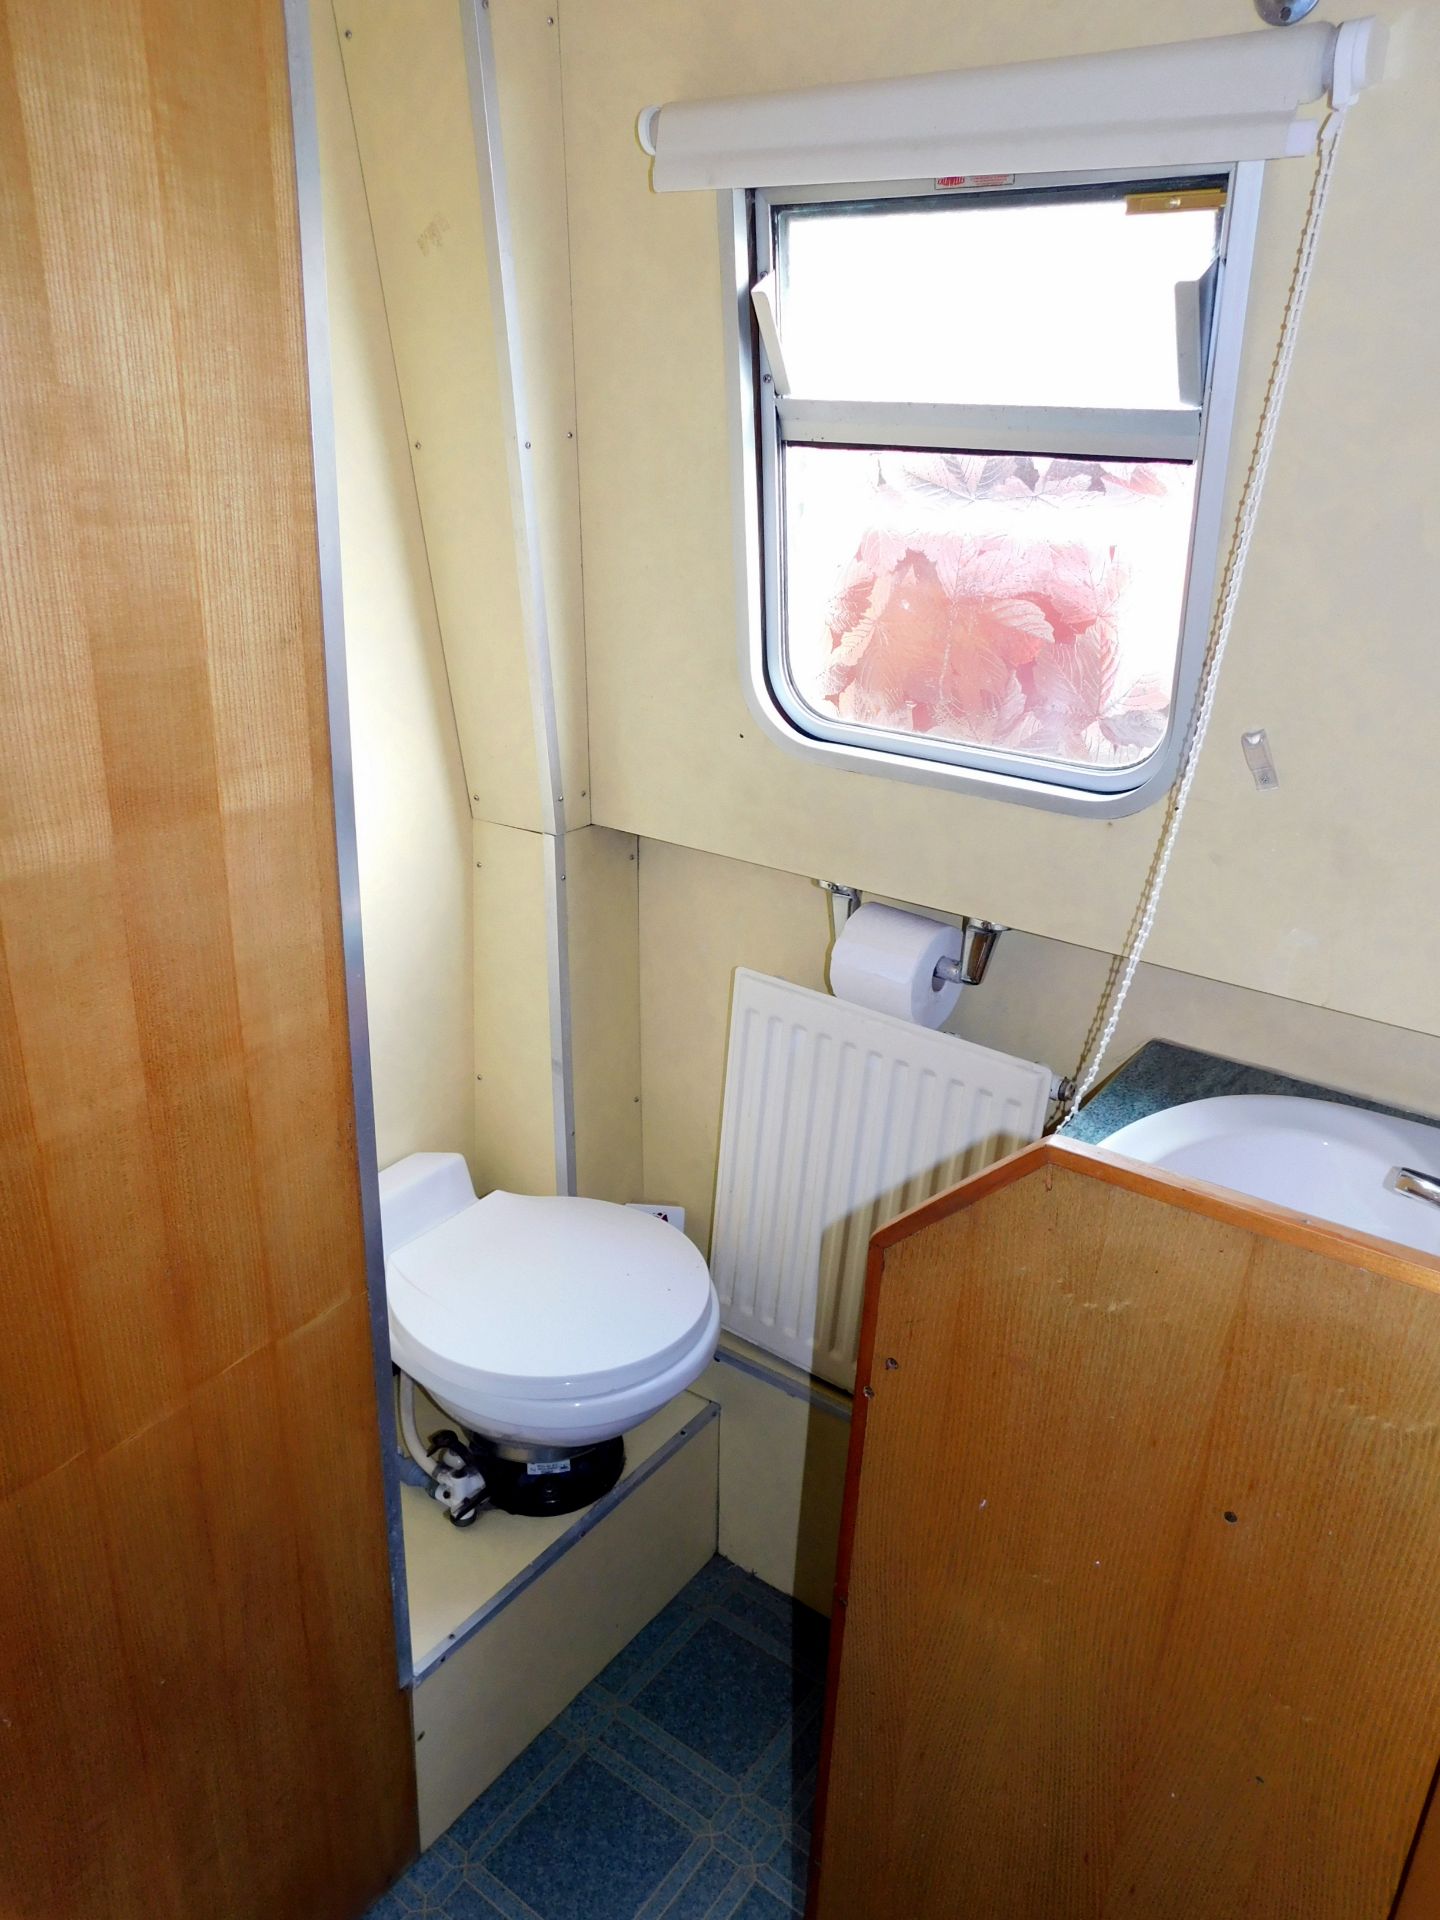 Norton Priory – 2000 65ft, 8 Berth Constructed by Liverpool Boats, Steel Hull (approx 6ft 10in - Image 22 of 52